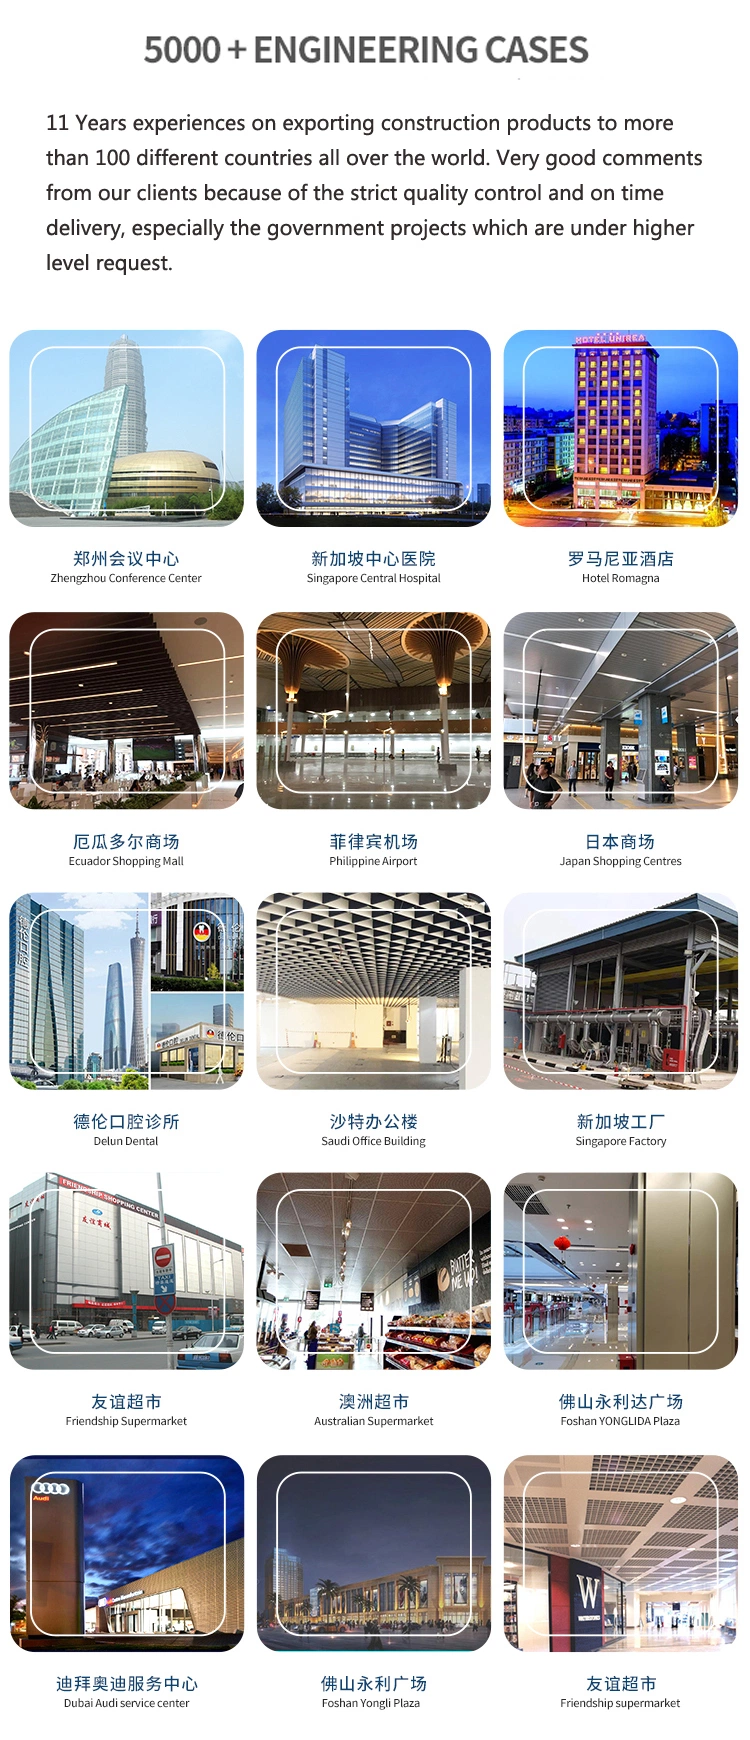 Acoustic False Ceiling Suspended Ceiling Frame T Bar Accessories Furring Channel Price/ T Grid